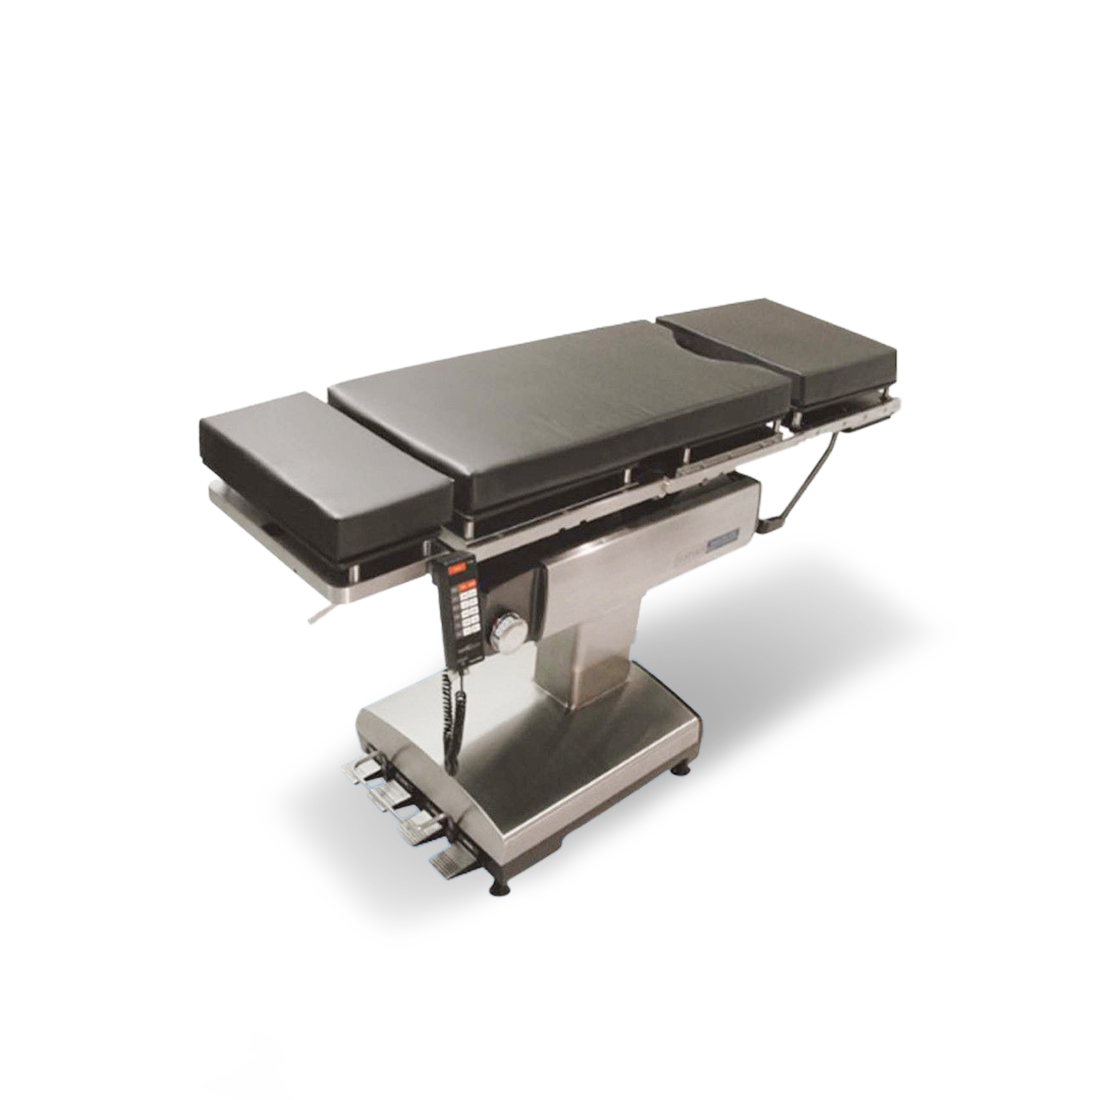 Steris Amsco 2080RC General Surgical Table